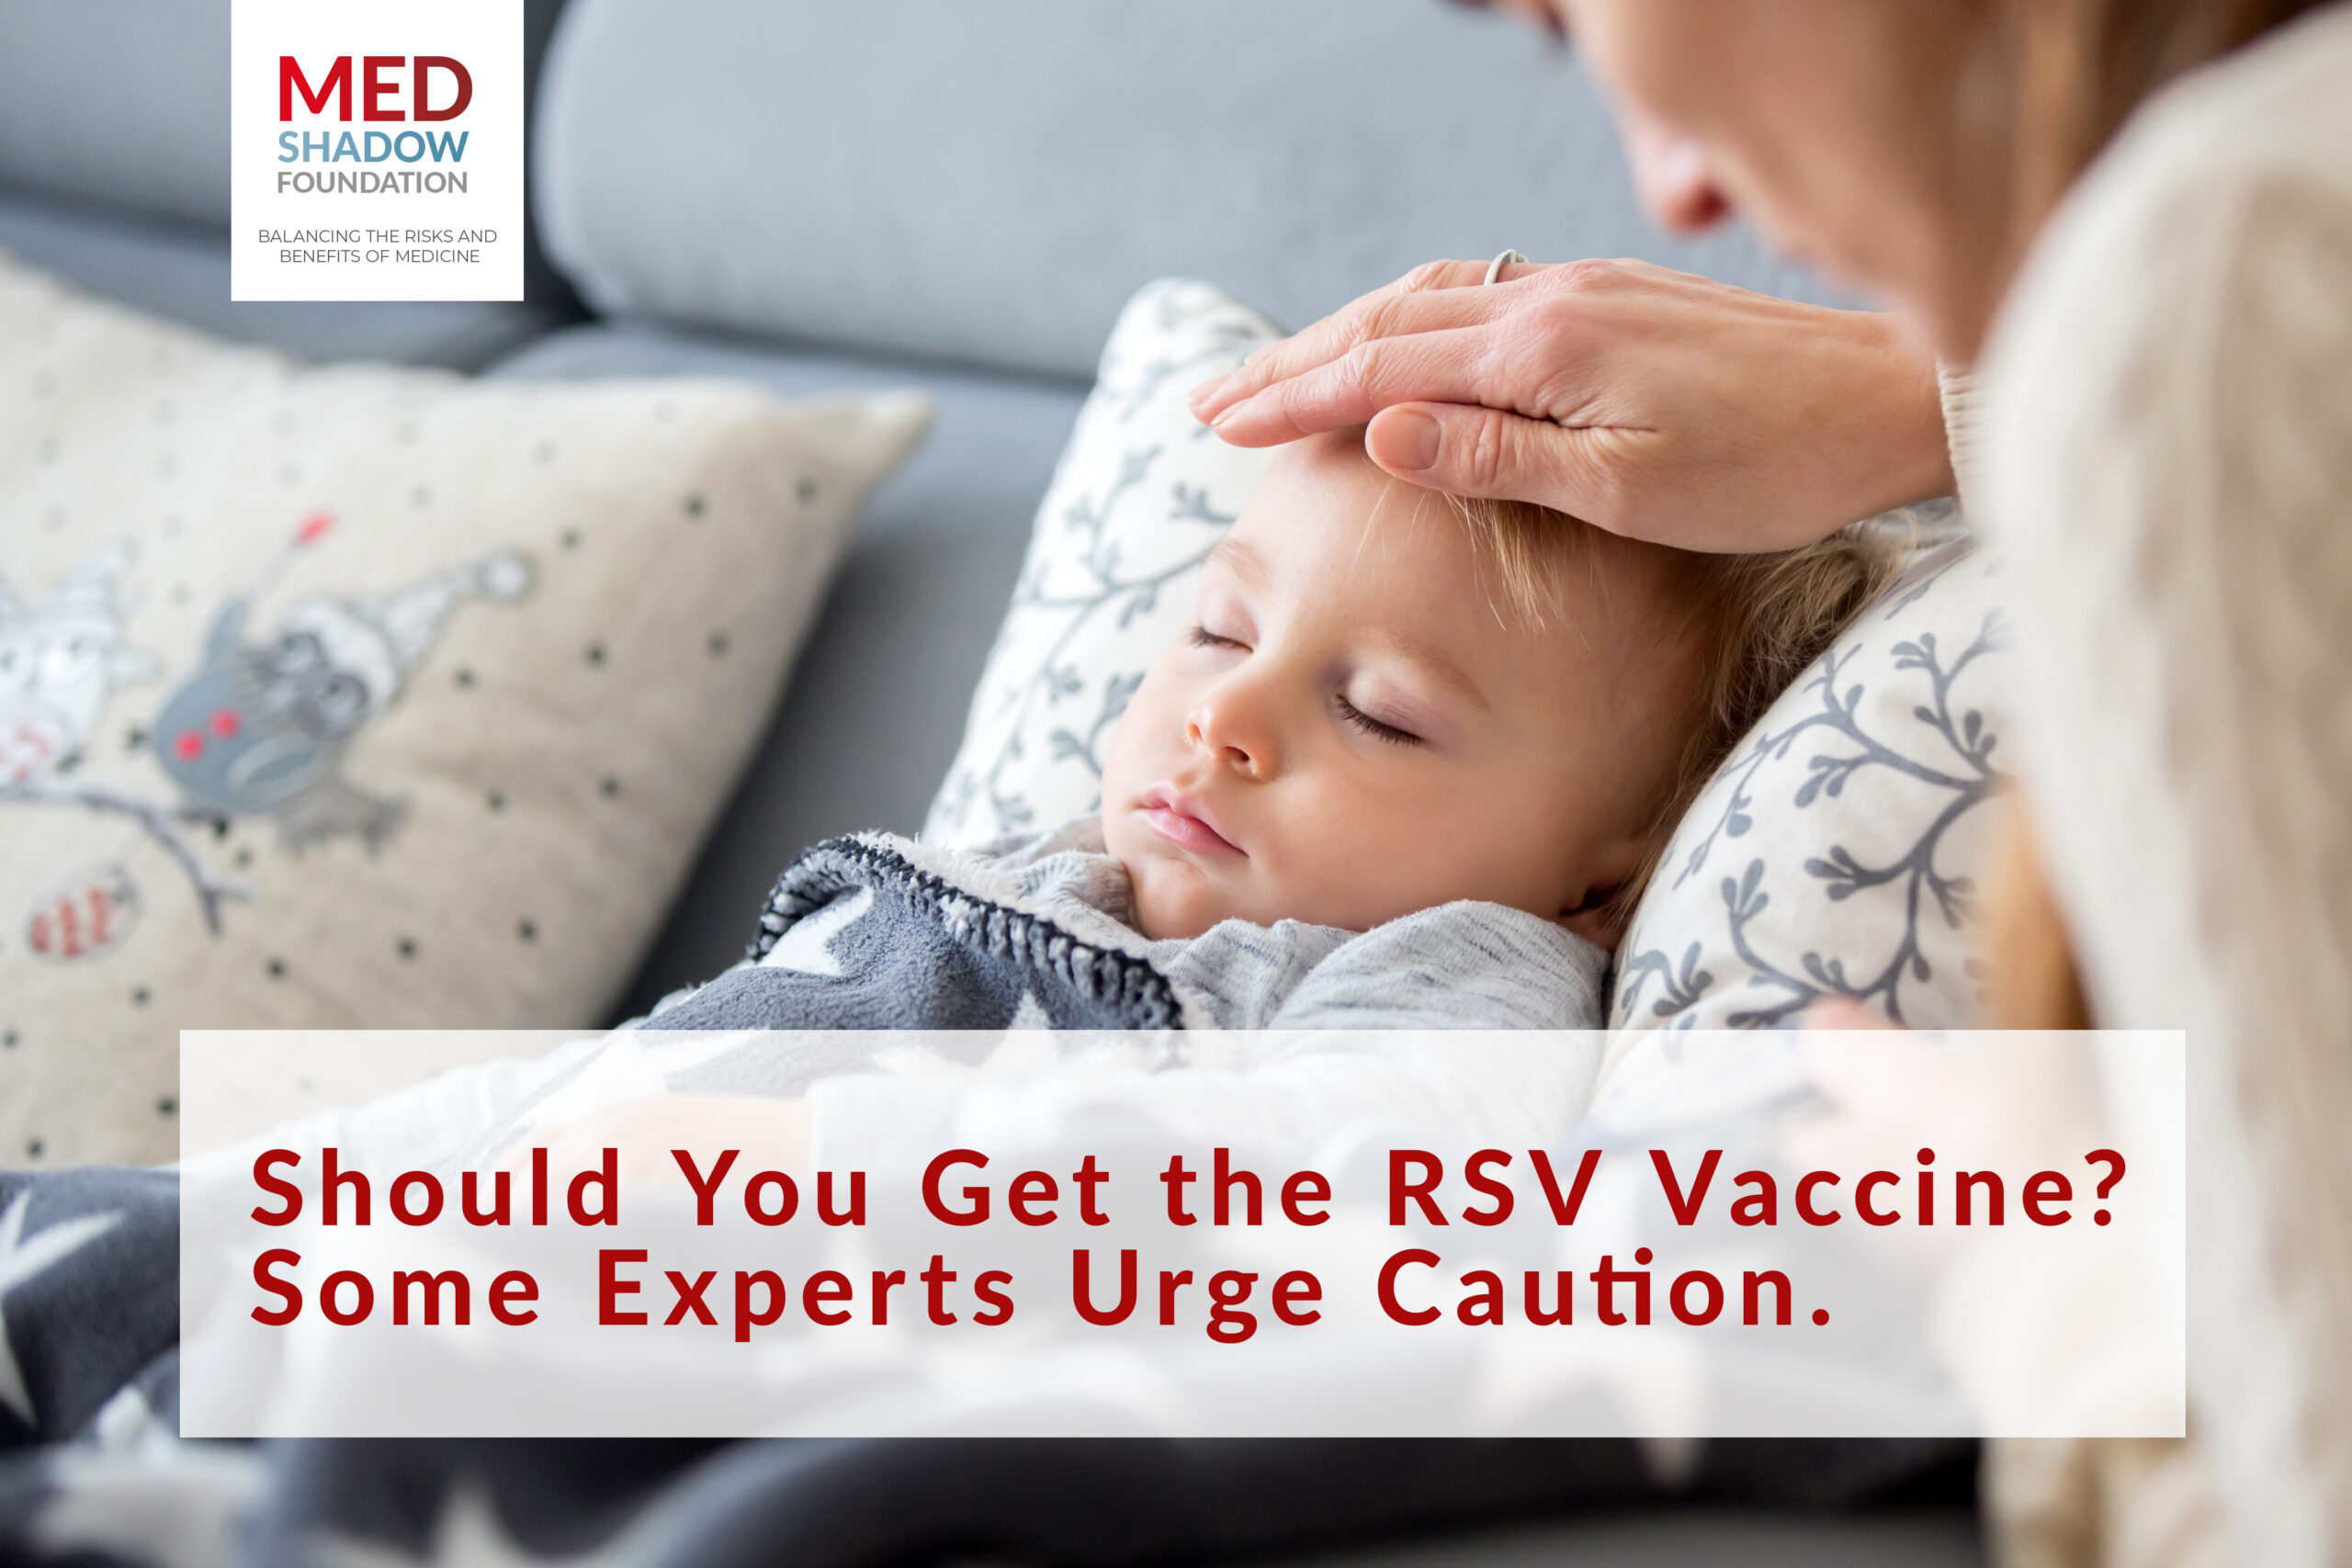 The new RSV shot for babies: What parents need to know - Harvard Health